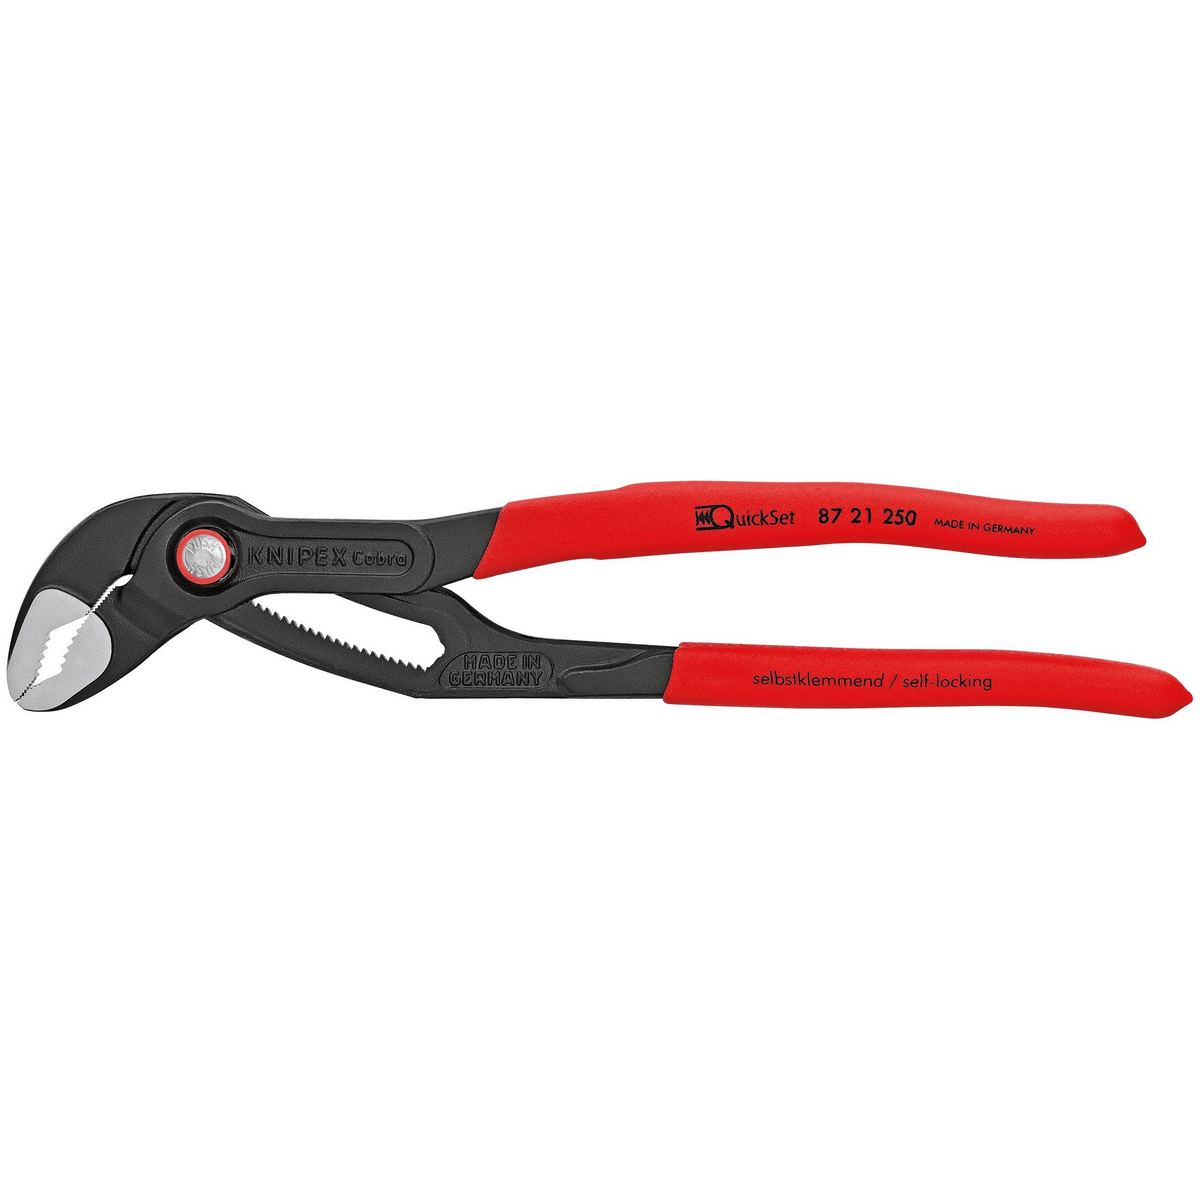 KNIPEX 87 21 250 Cobra Quick Set Water Pump Pliers - wise-line-tools